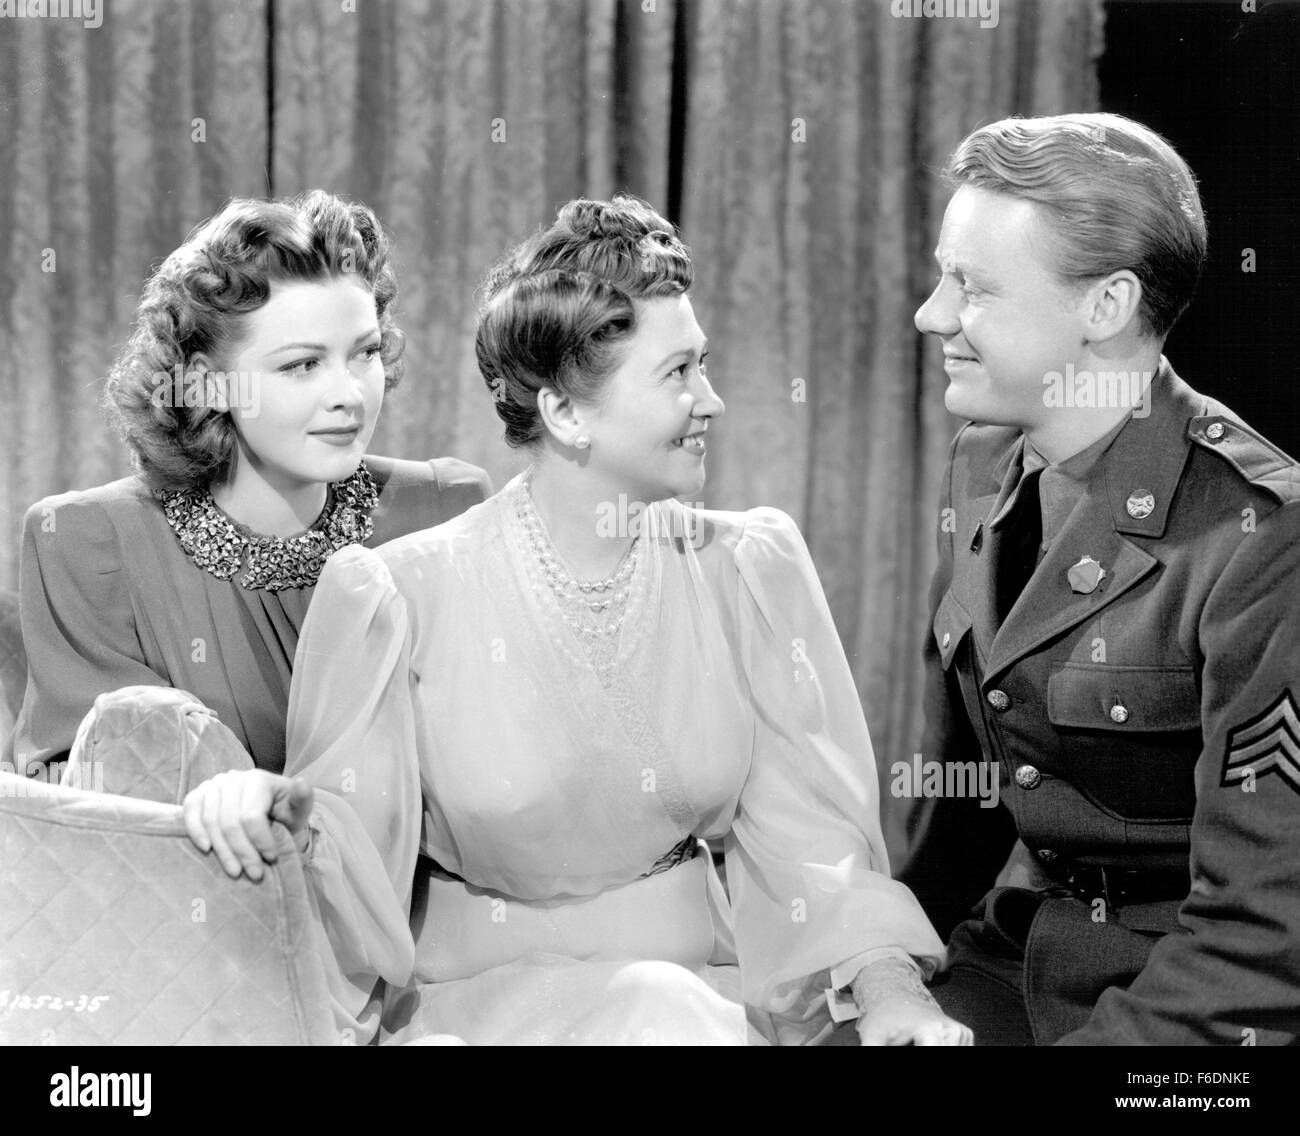 RELEASE DATE: August 7, 1942. MOVIE TITLE: The War Against Mrs. Hadley. STUDIO: Metro-Goldwyn-Mayer (MGM). PLOT: . PICTURED: FAY BAINTER as Stella Hadley, JEAN ROGERS as Patricia Hadley and VAN JOHNSON as Michael Fitzpatrick. Stock Photo